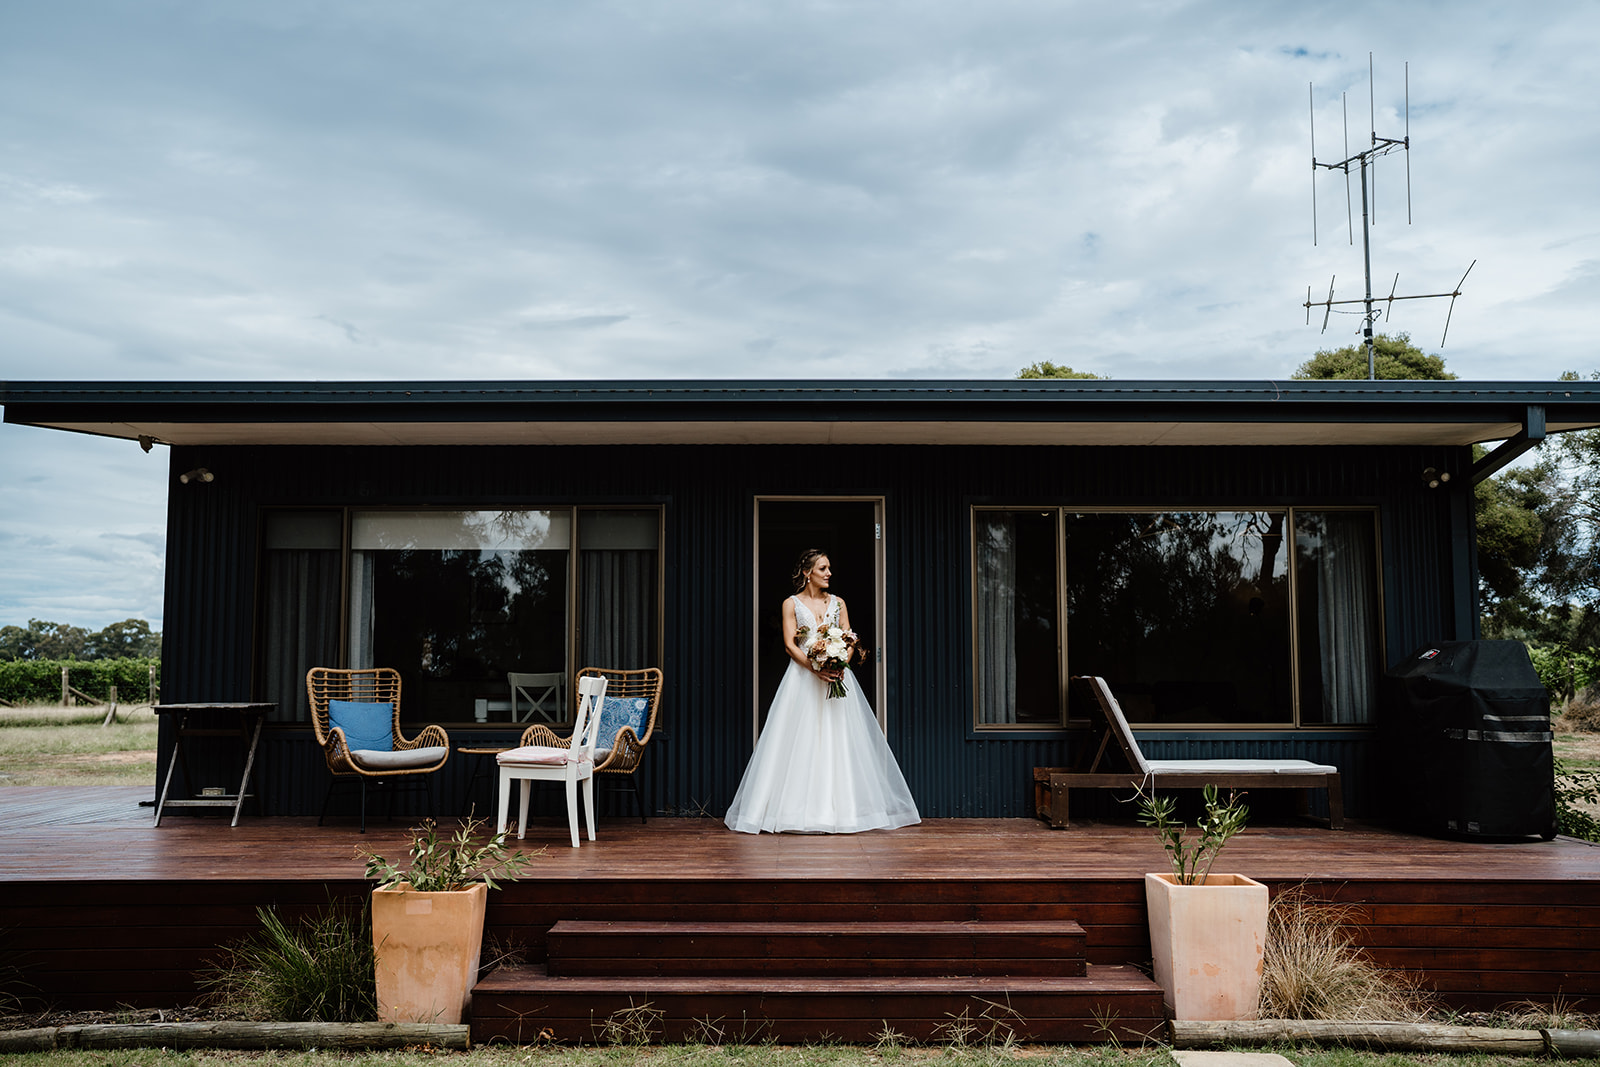 Sarah and Cameron's wedding photographed by Rachael Emmily Photography at Lake Moodemere Estate